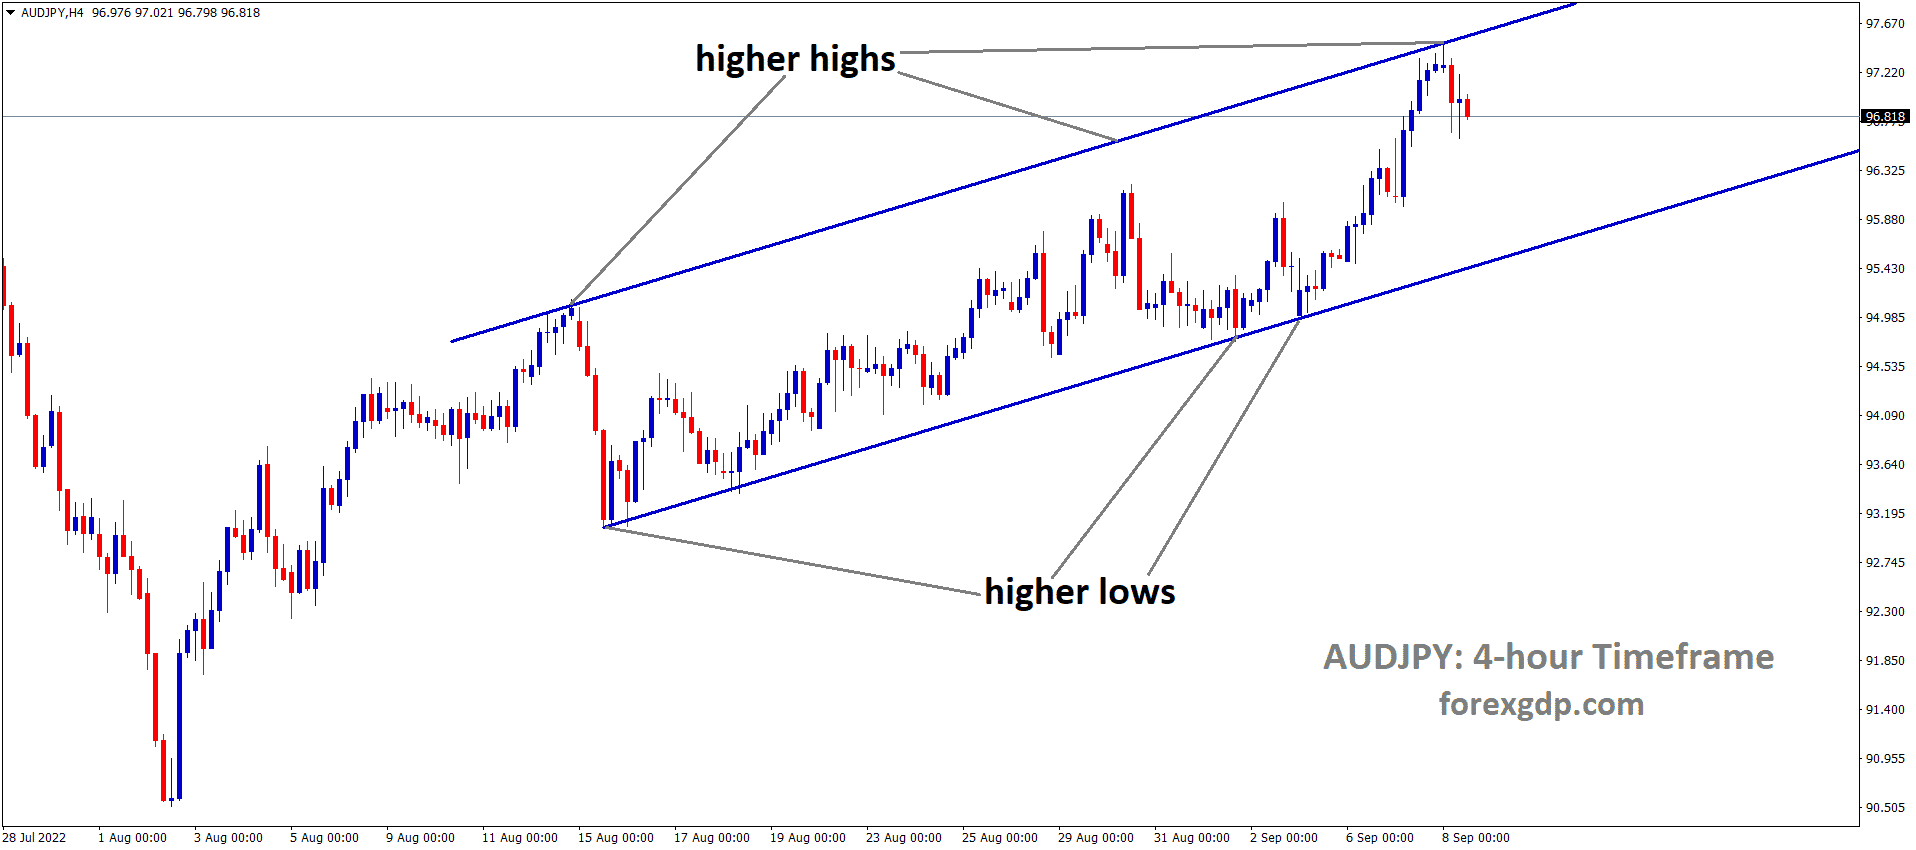 AUDJPY is moving in an Ascending channel and the market has fallen from the higher high area of the channel.